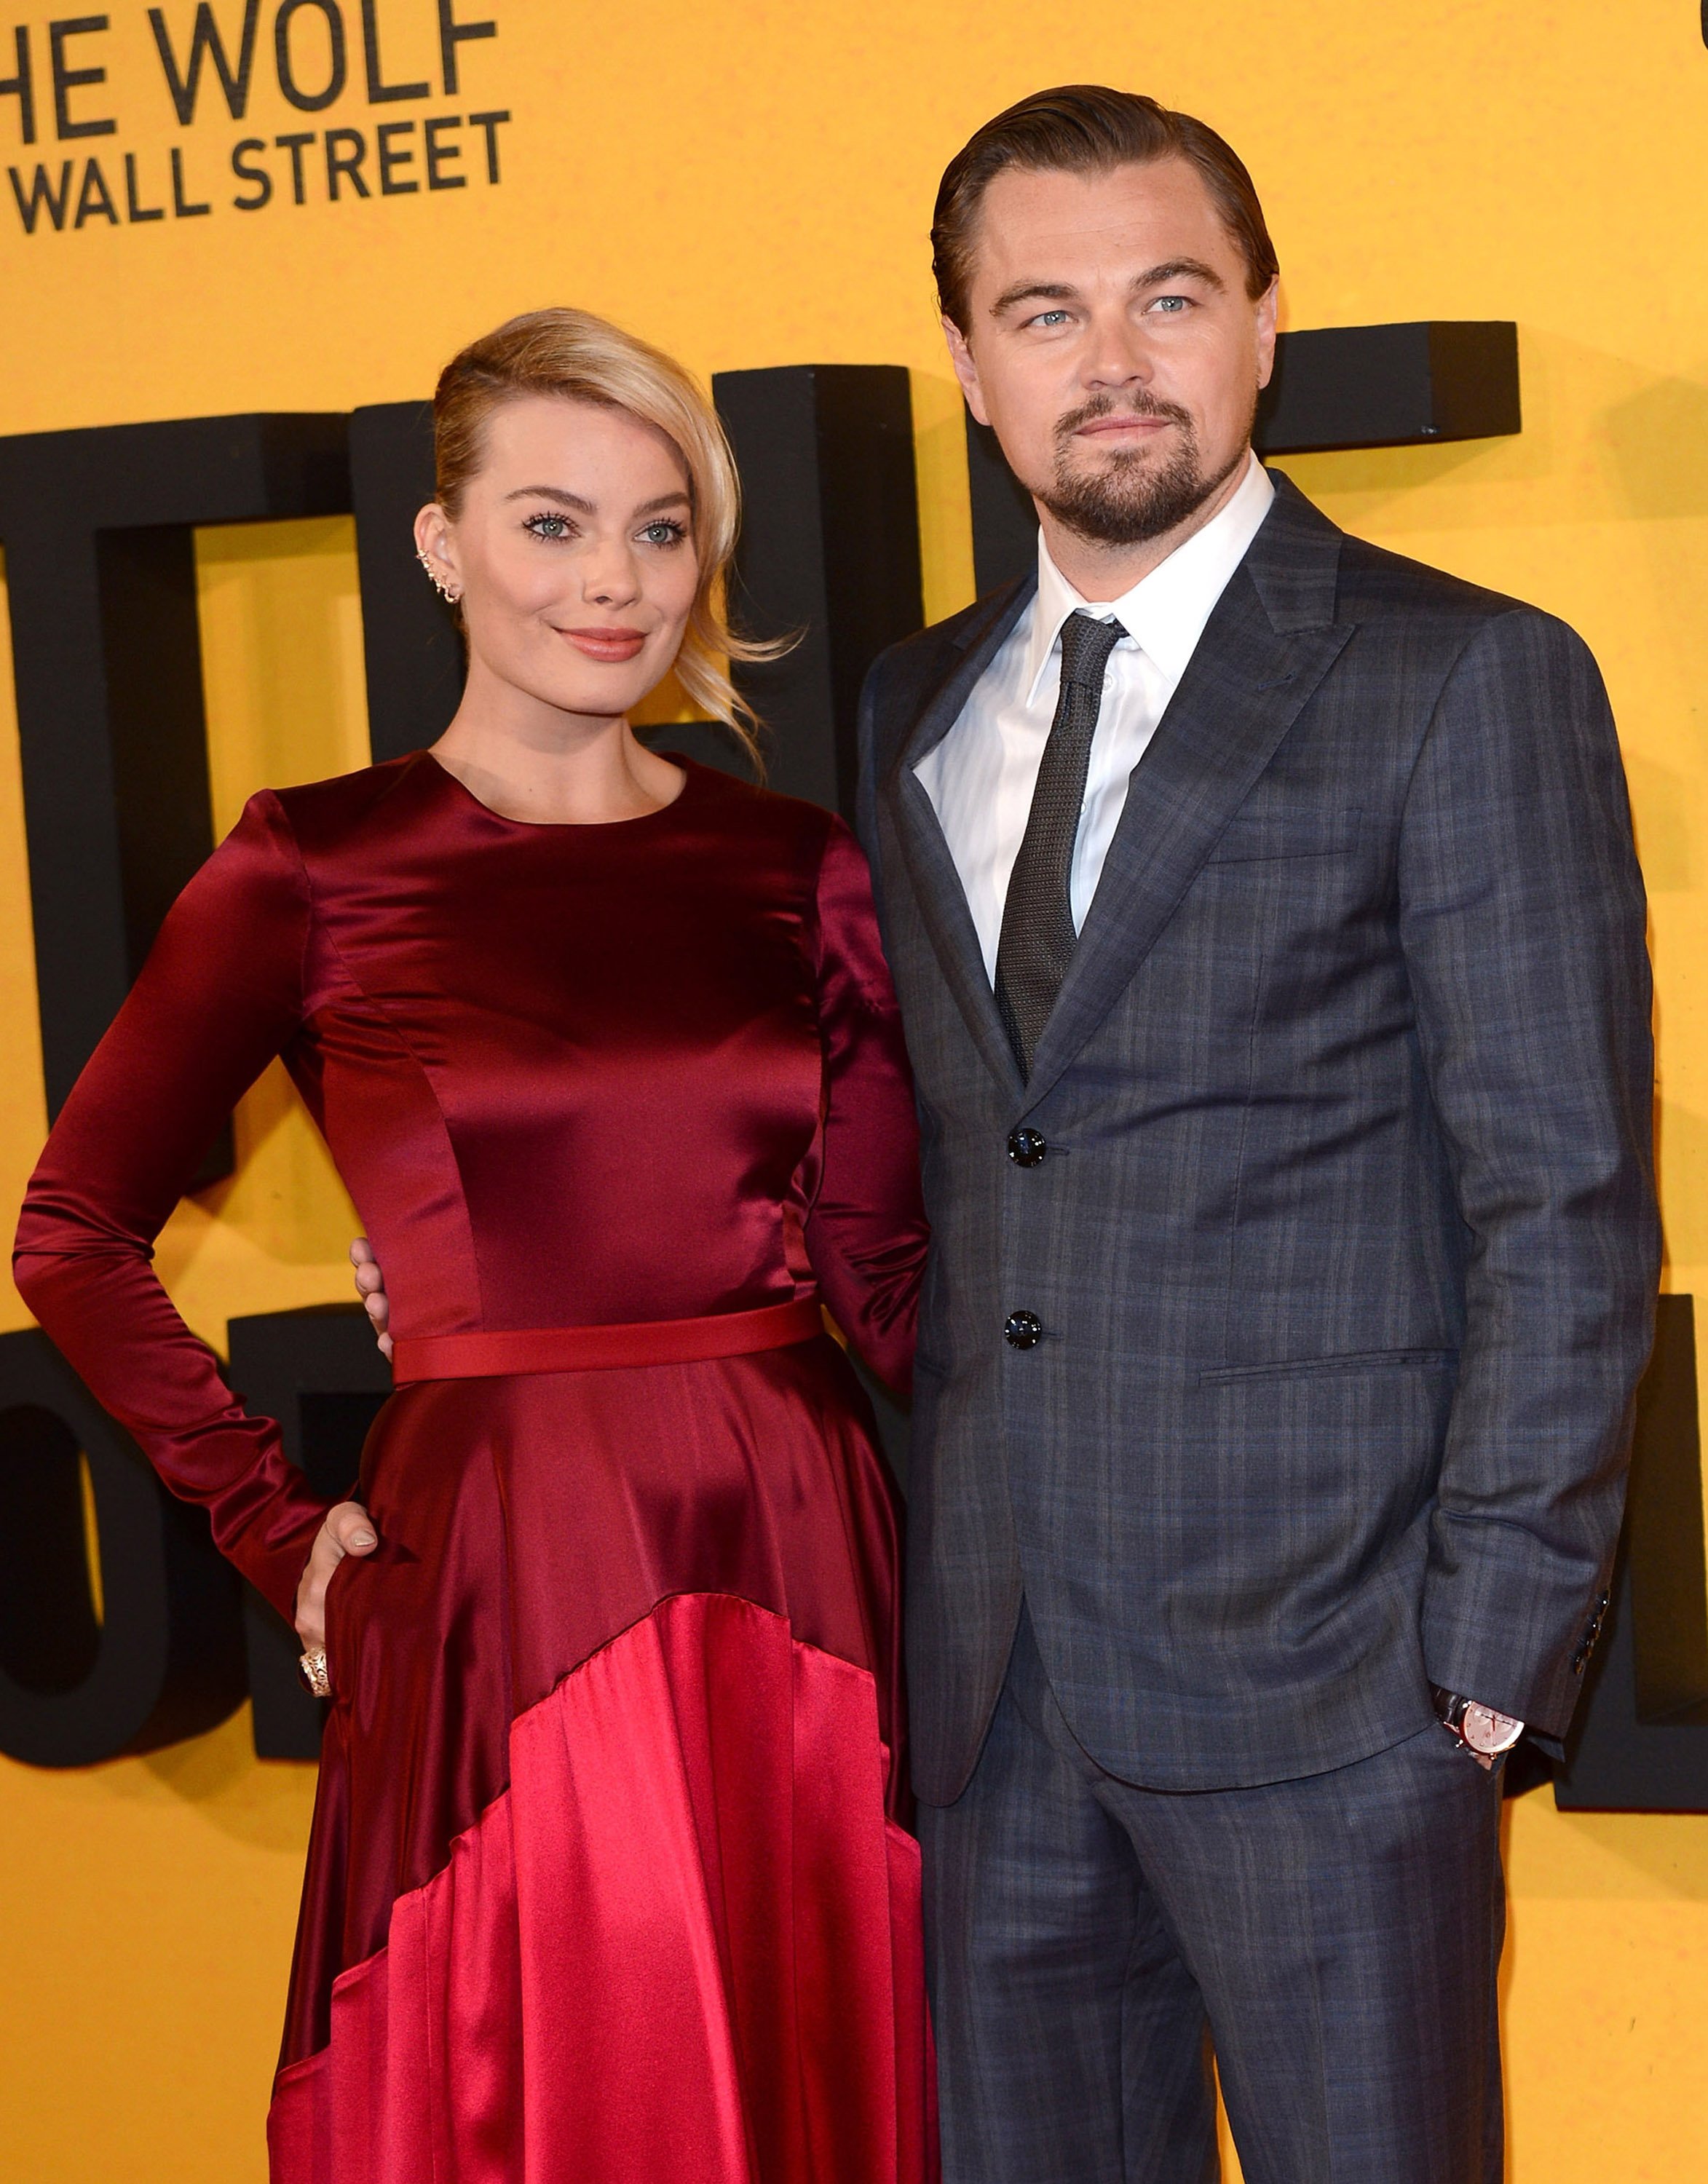 Margot Robbie and Leonardo DiCaprio attend the UK Premiere of "The Wolf Of Wall Street" at the Odeon Leicester Square on January 9, 2014 in London, England. 